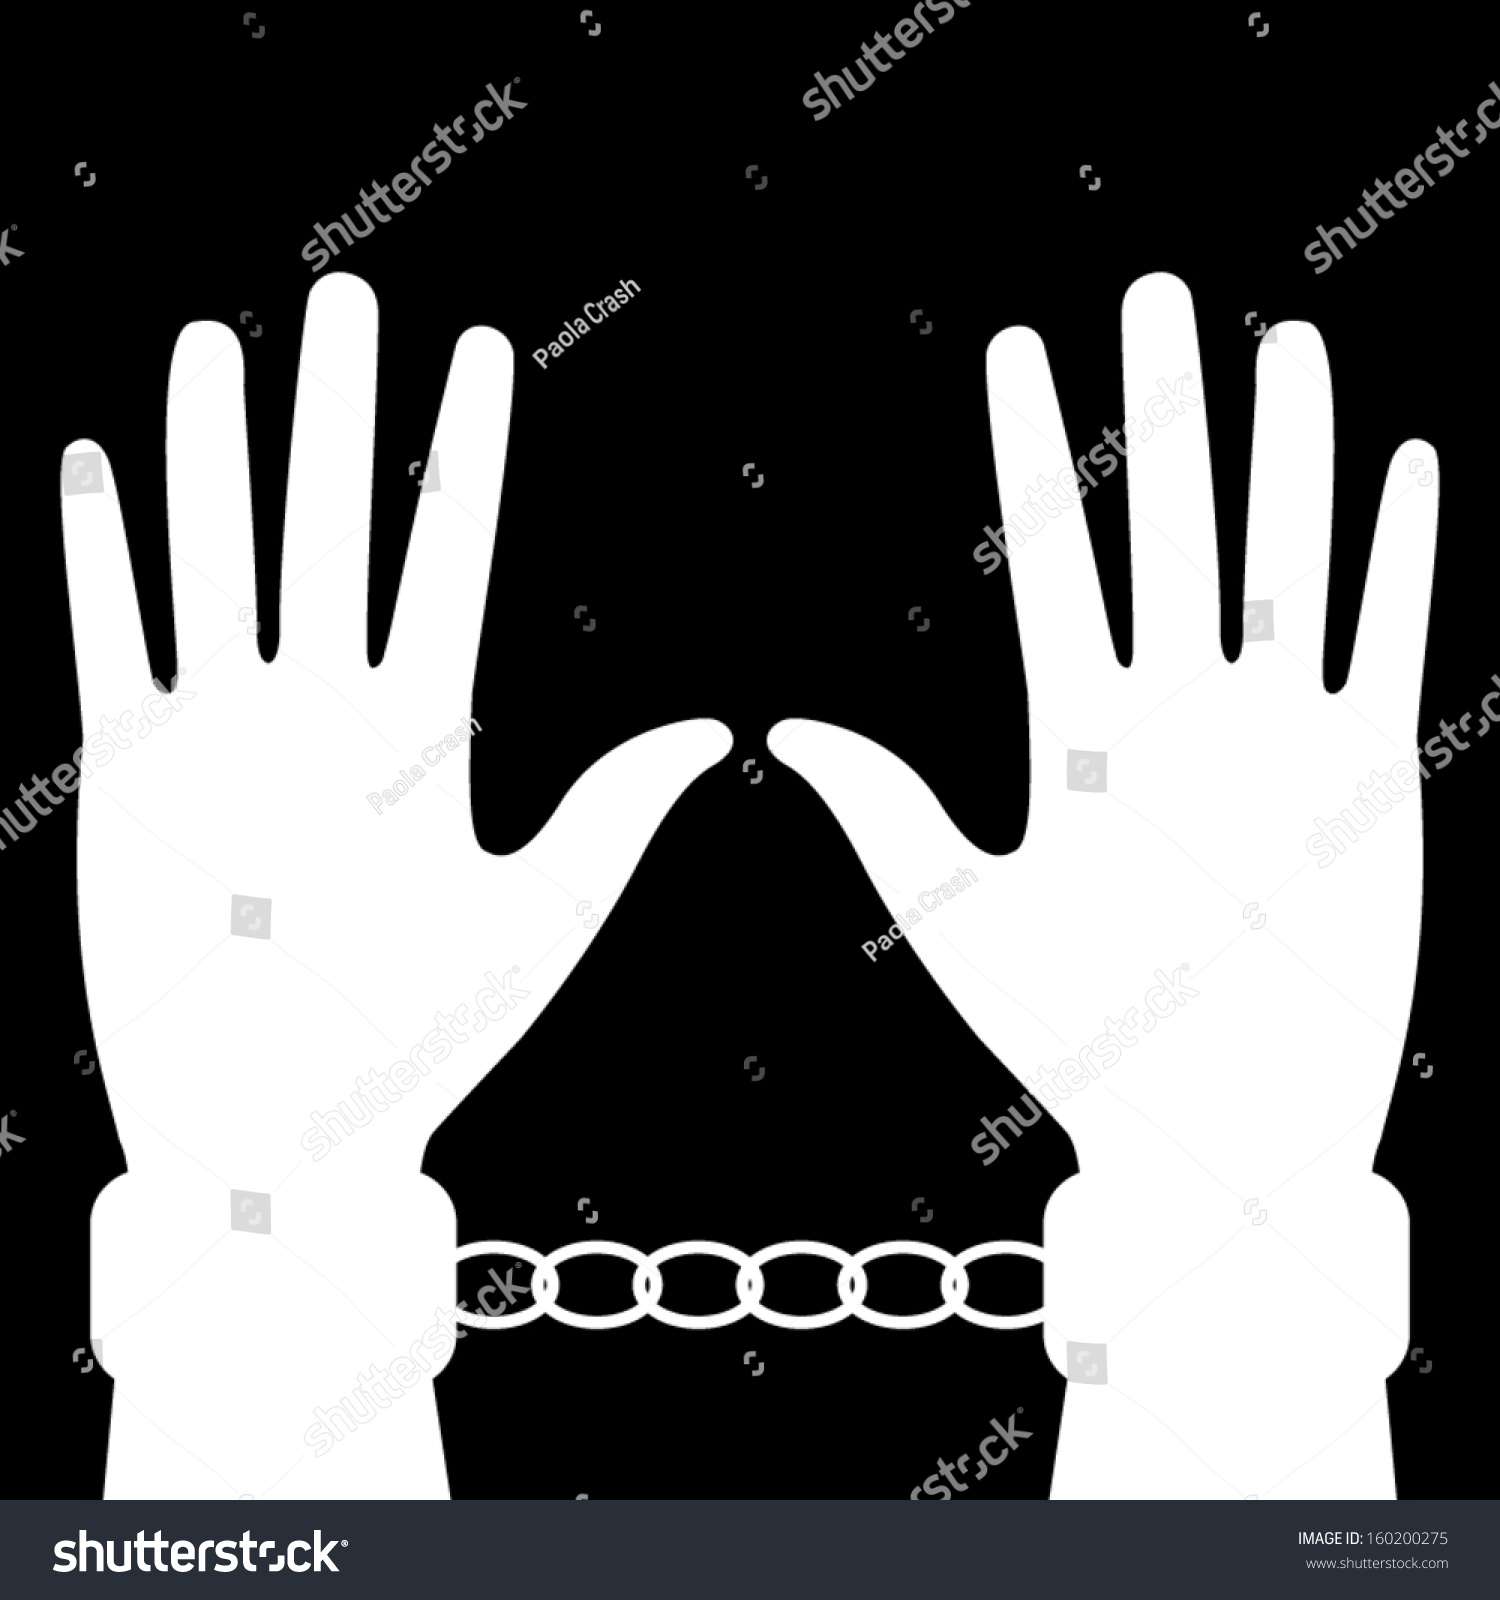 Silhouette Hands Handcuffs Stock Vector (Royalty Free) 160200275 ...